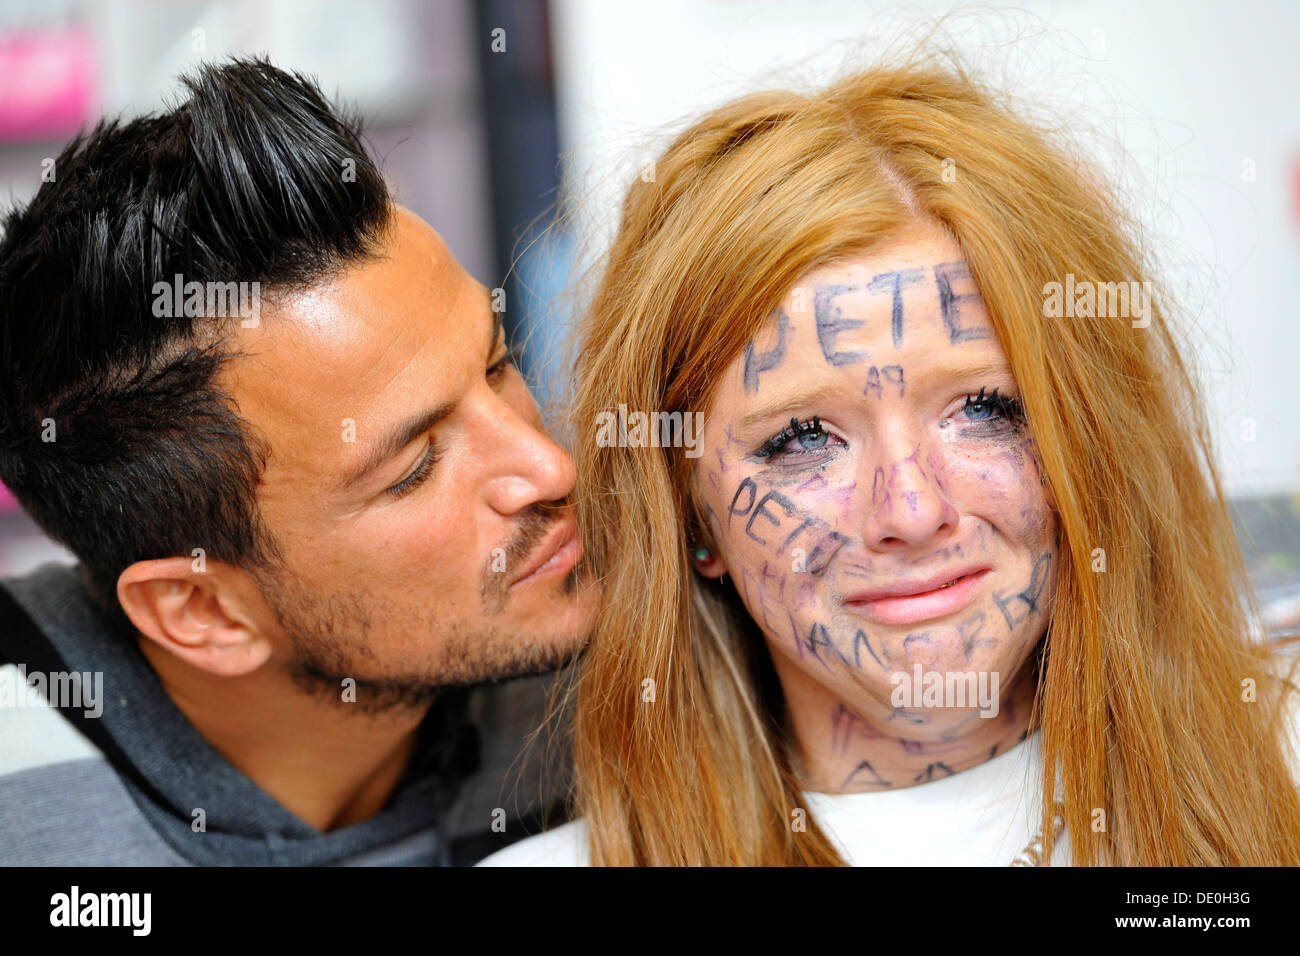 Musician Peter Andre with a extremely devoted superfan. Stock Photo